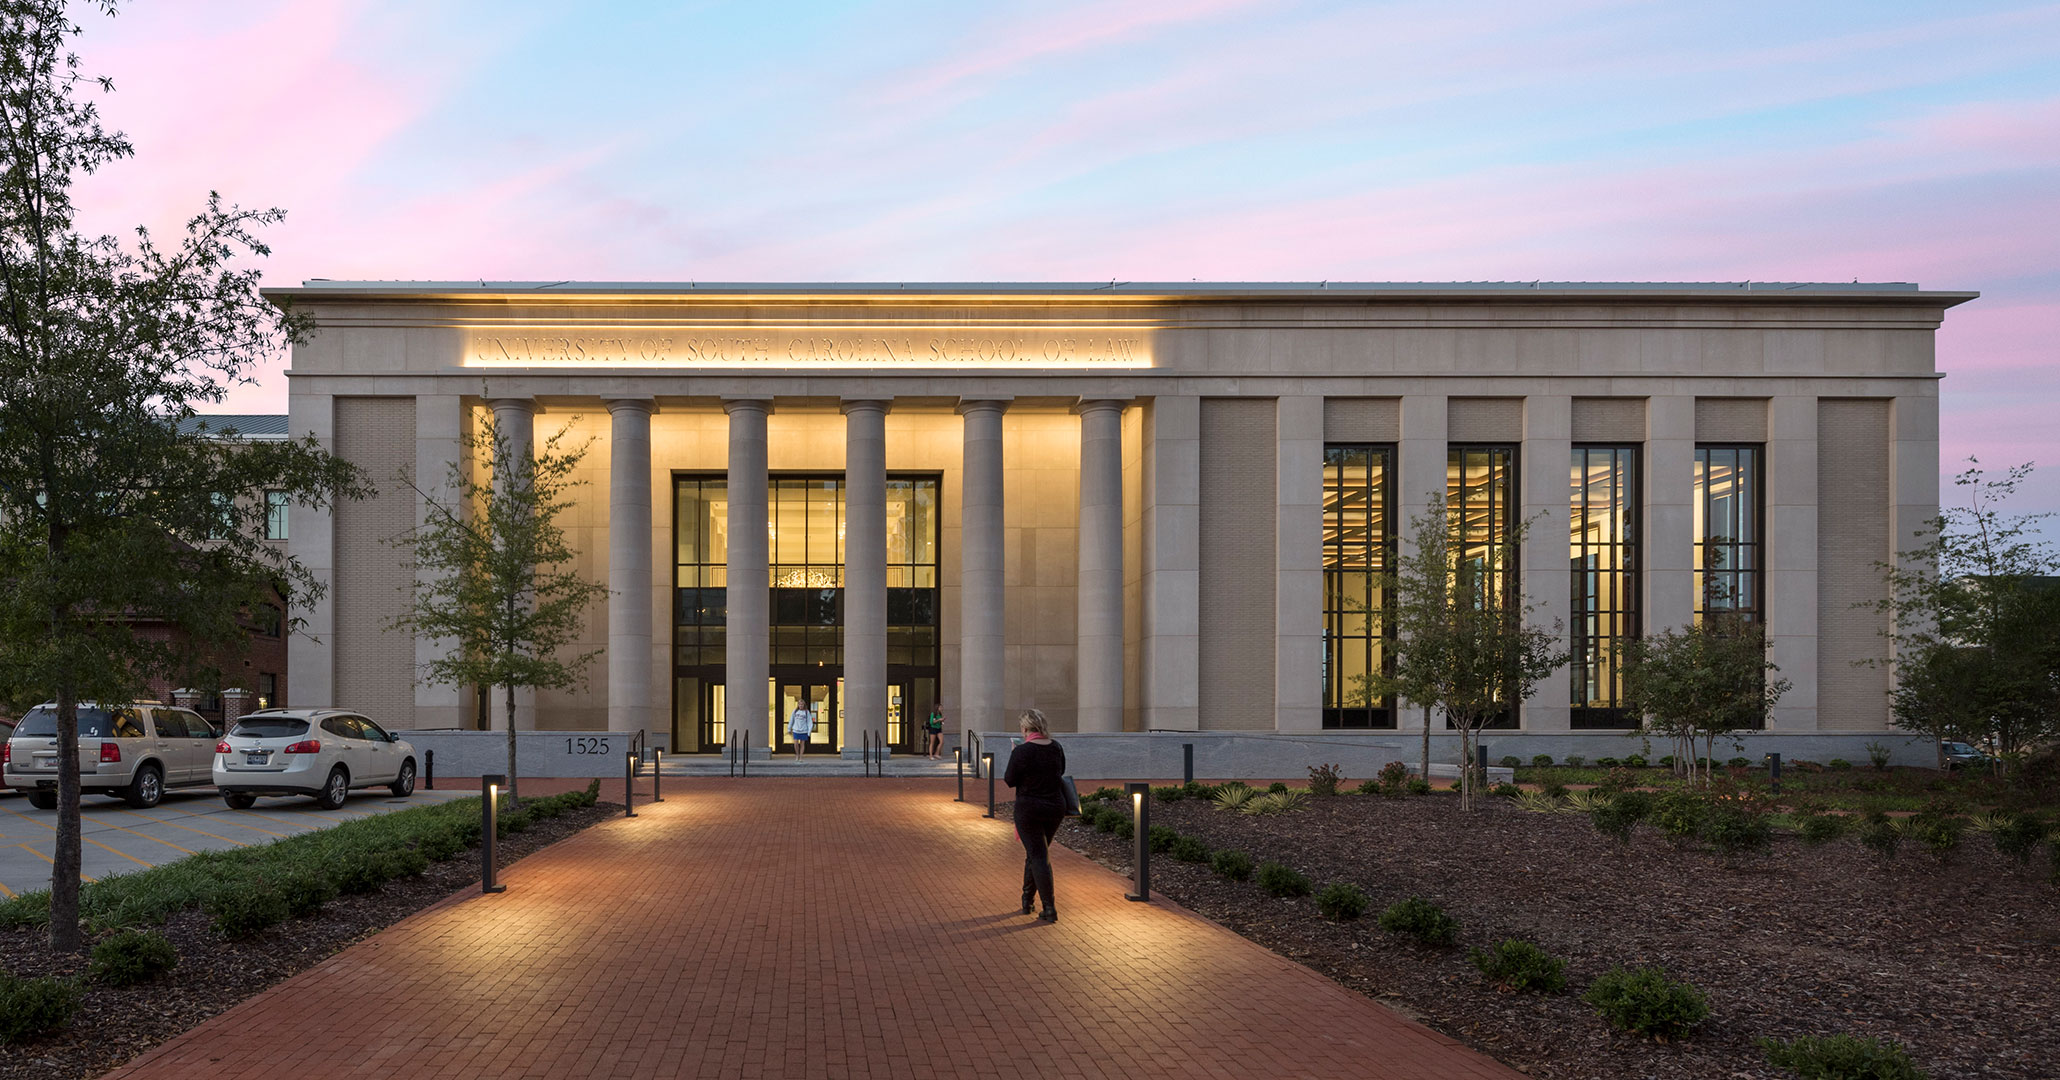 The University of South Carolina worked with Boudreaux architects to design the new Law School.